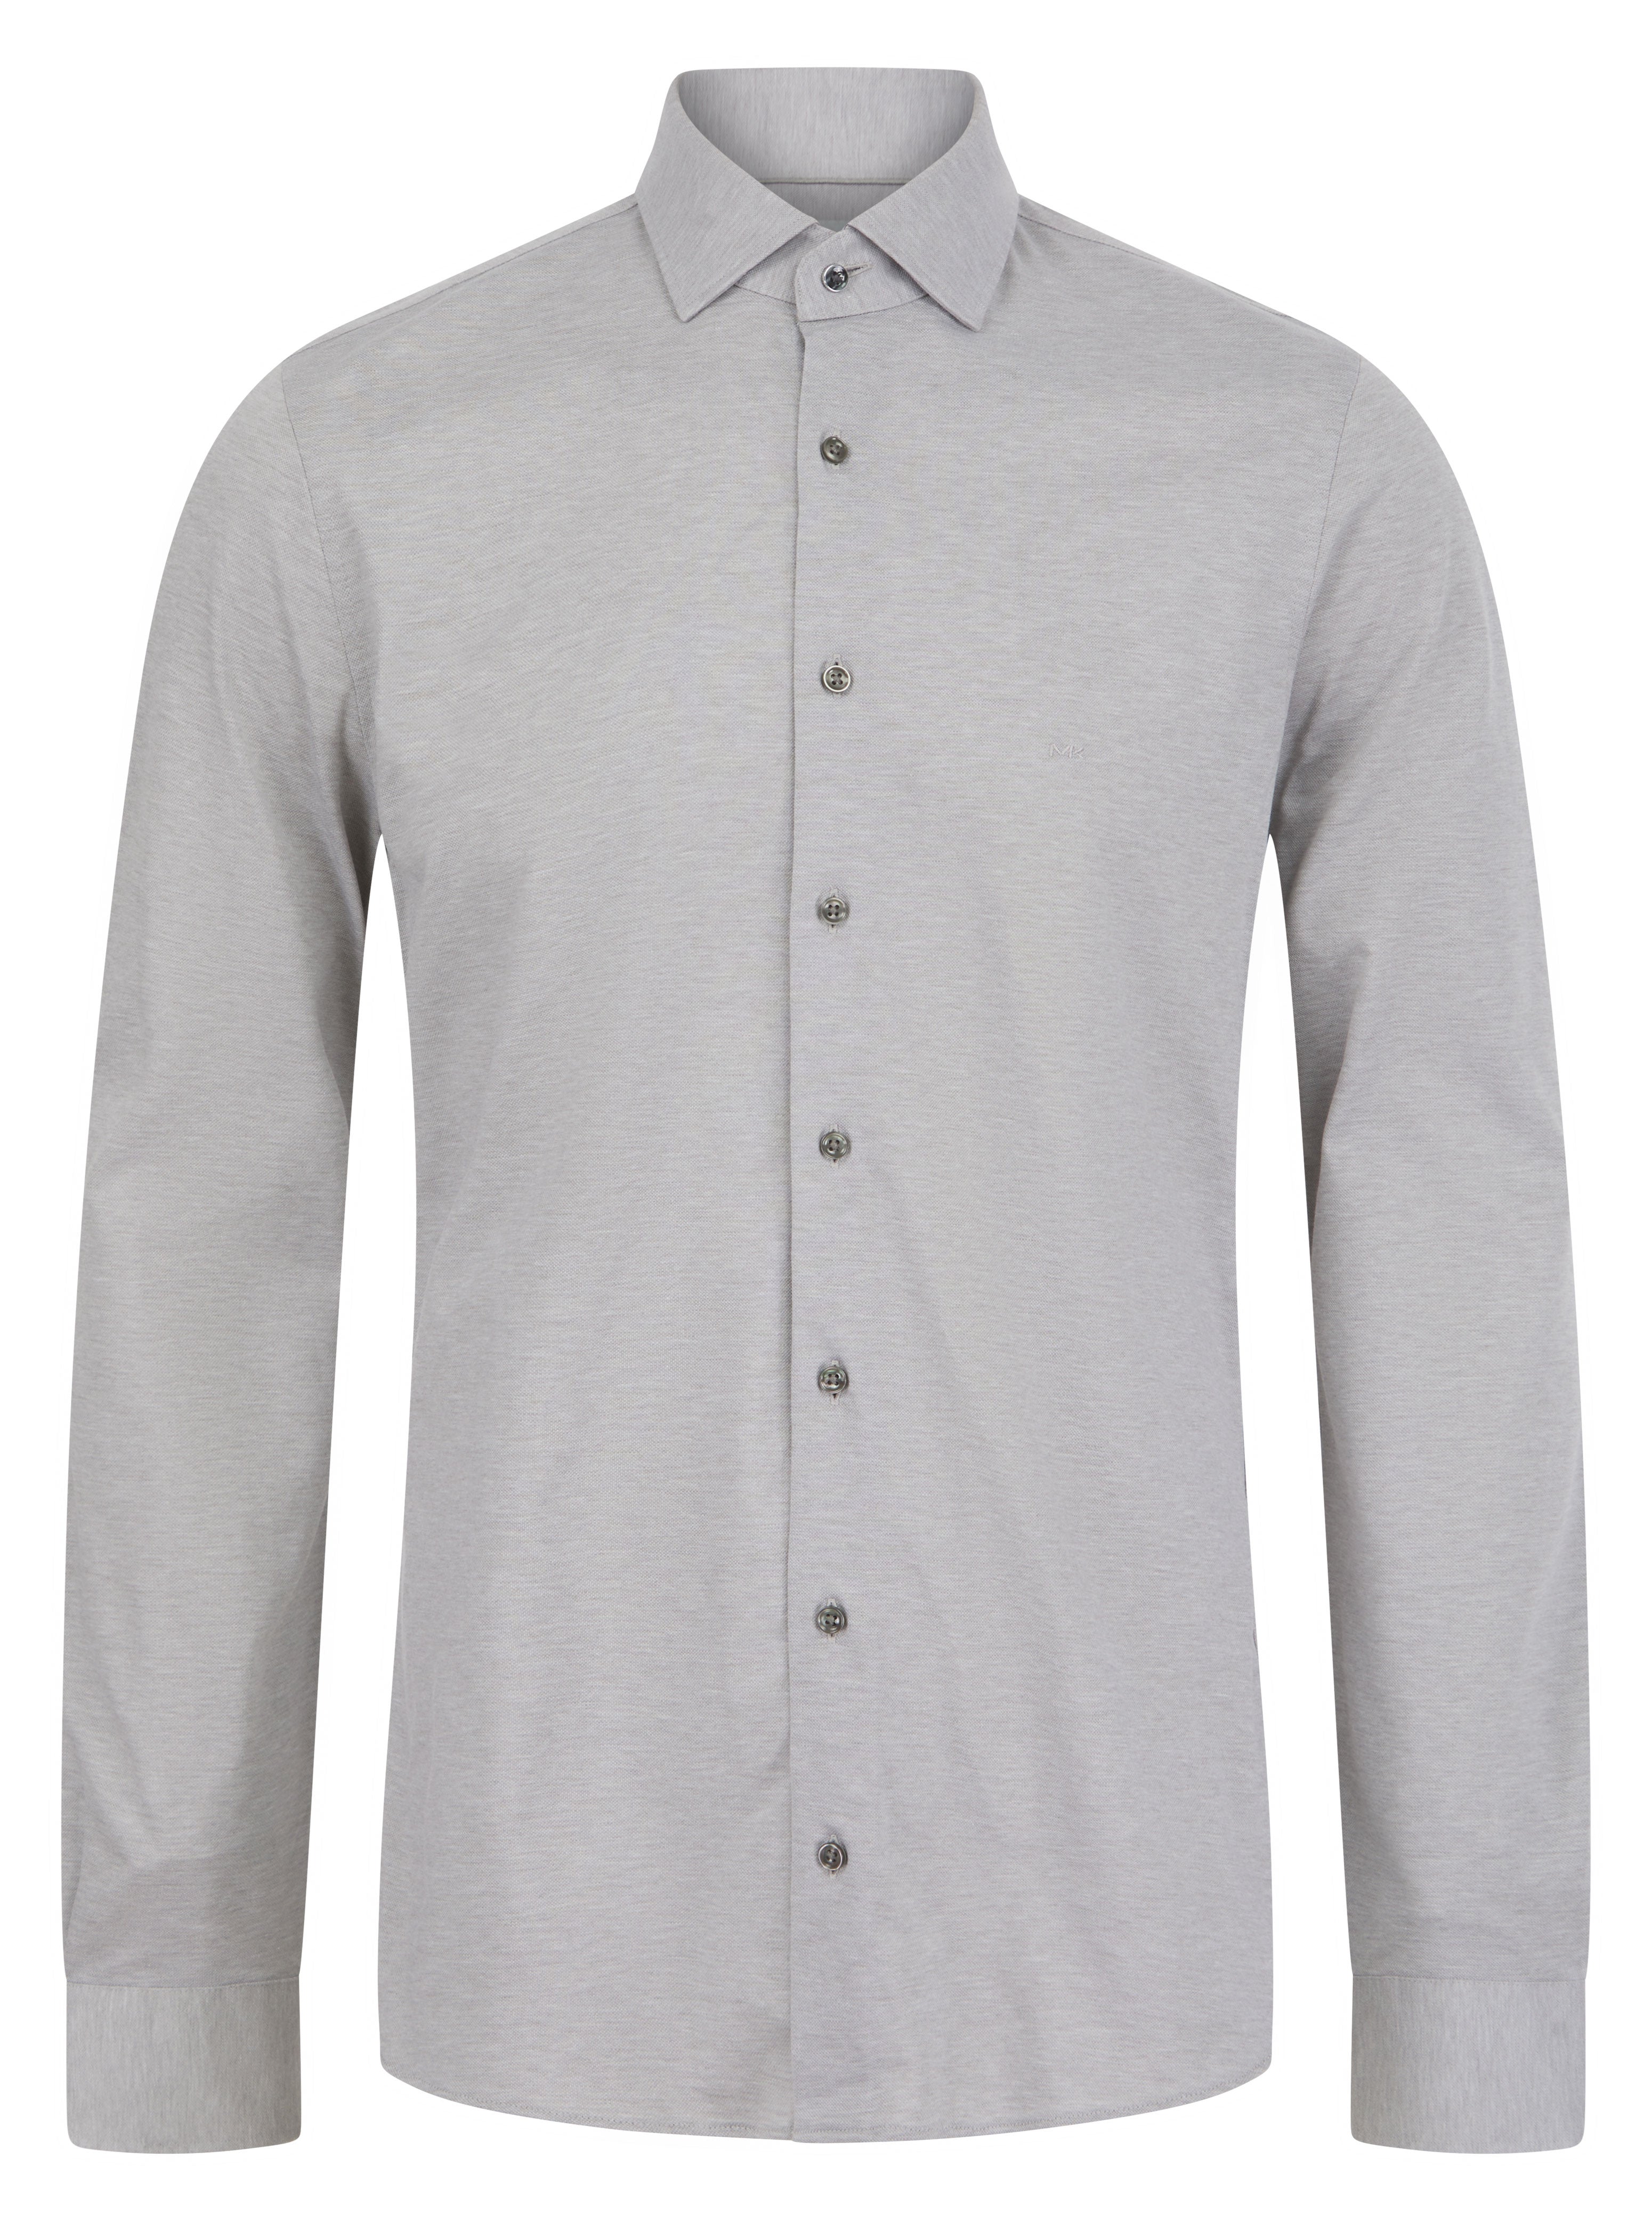 Load image into Gallery viewer, Michael Kors Pique Shirt Grey
